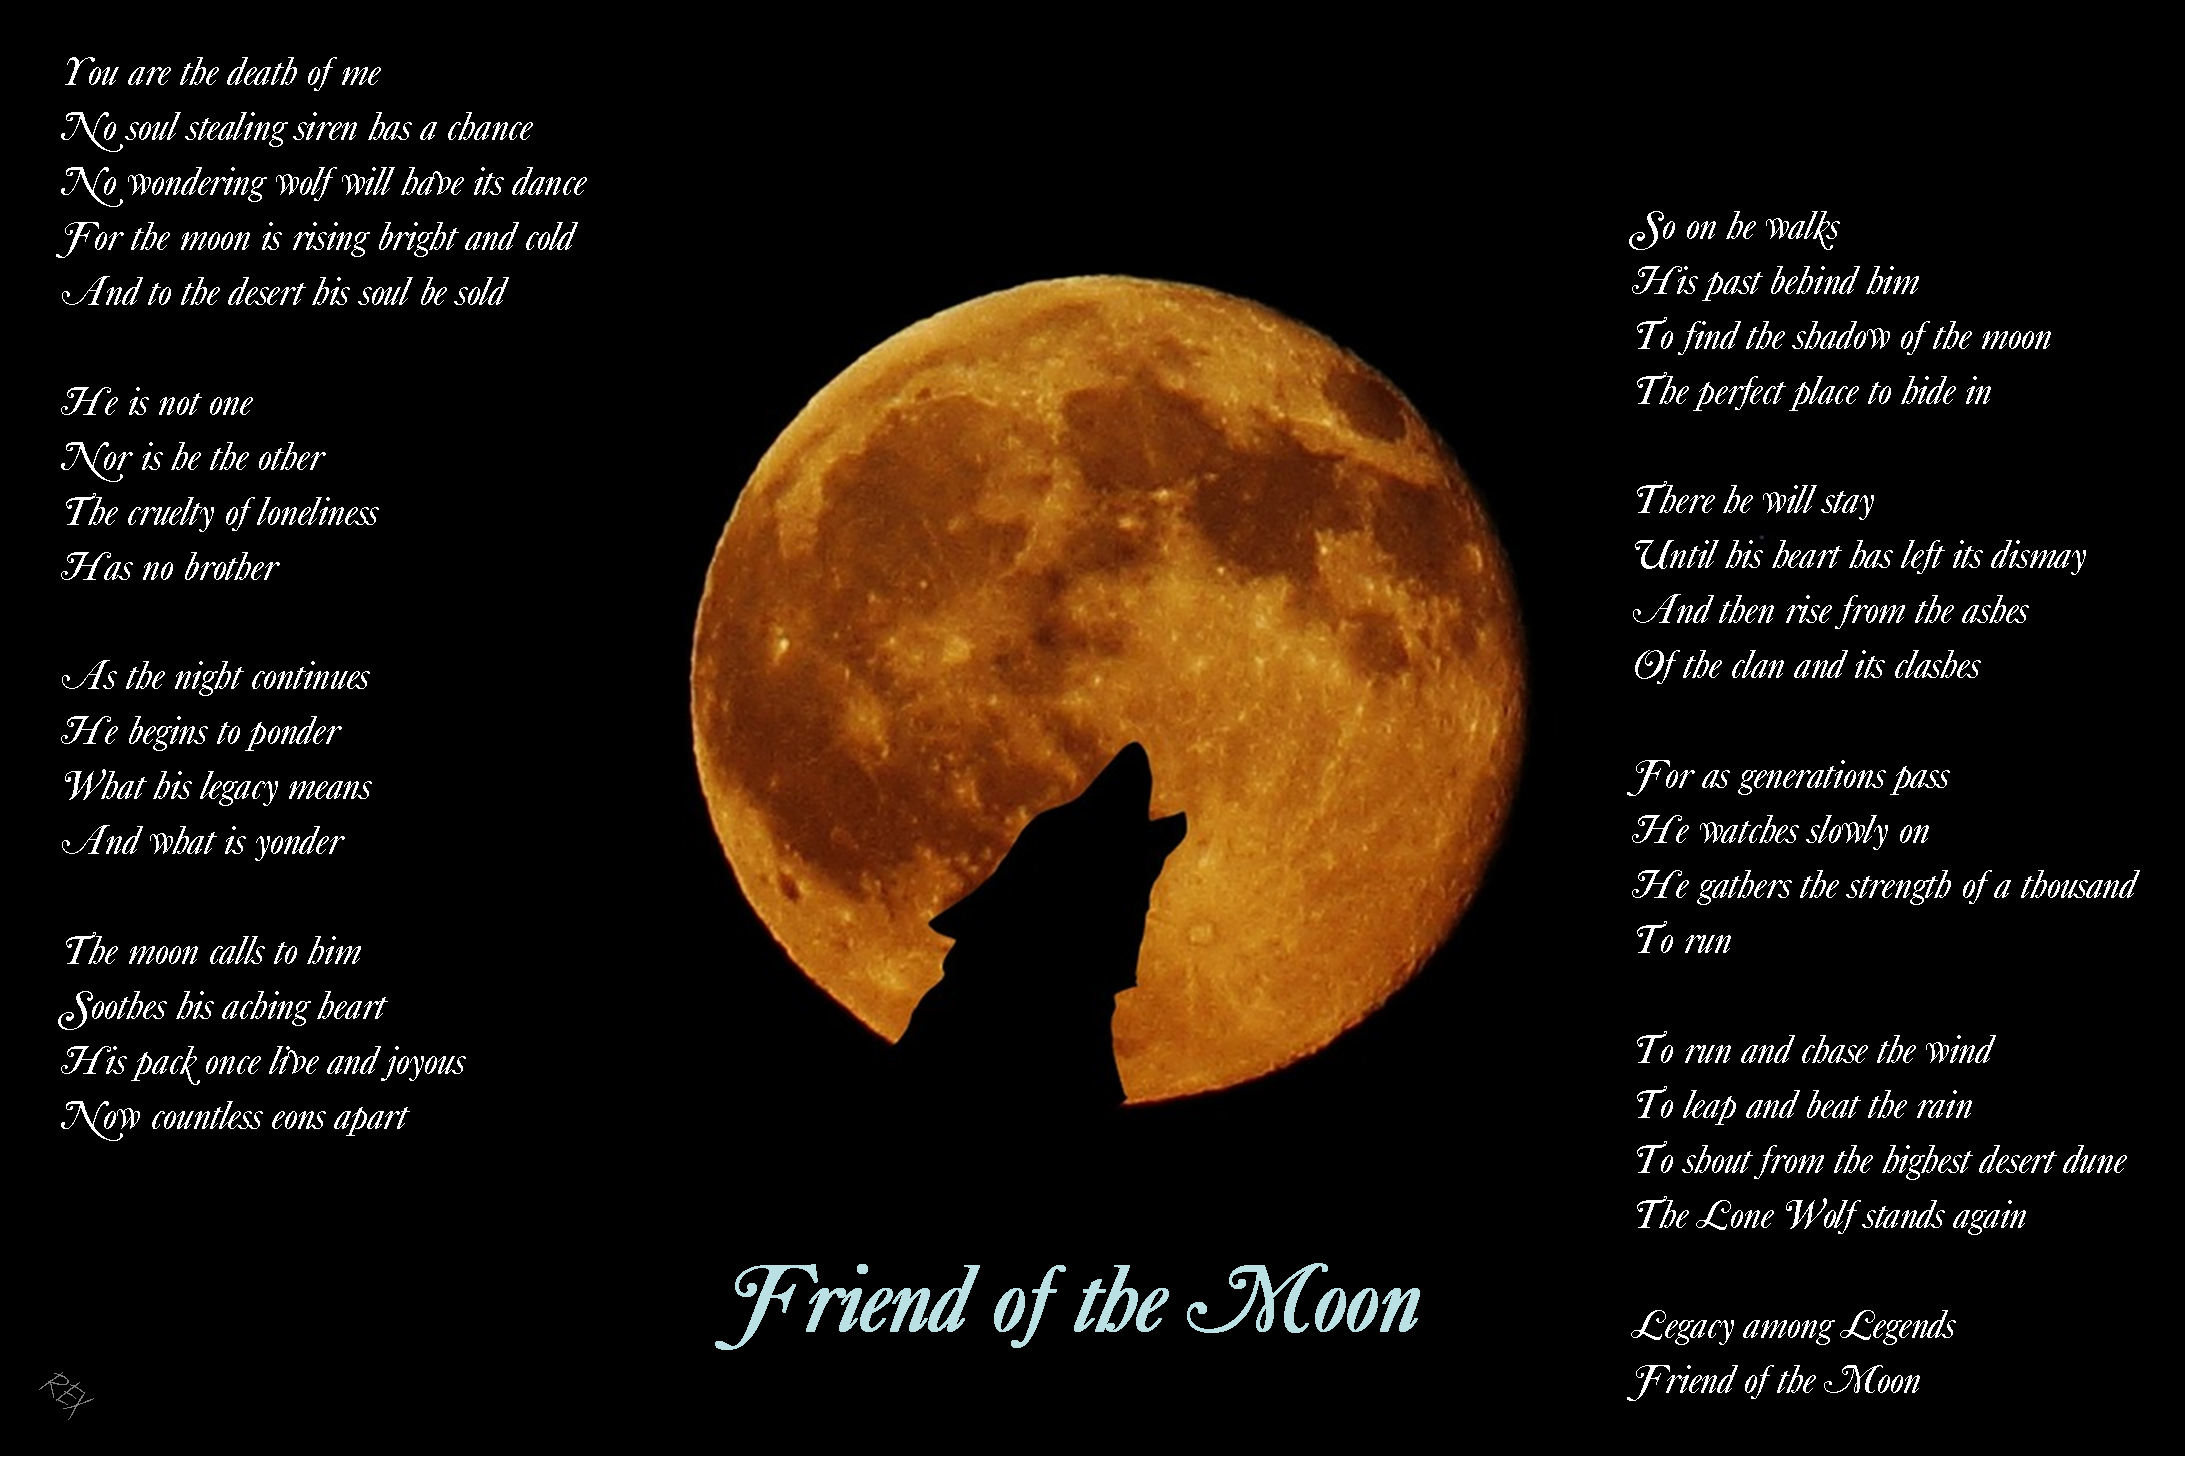 Friend of the Moon2